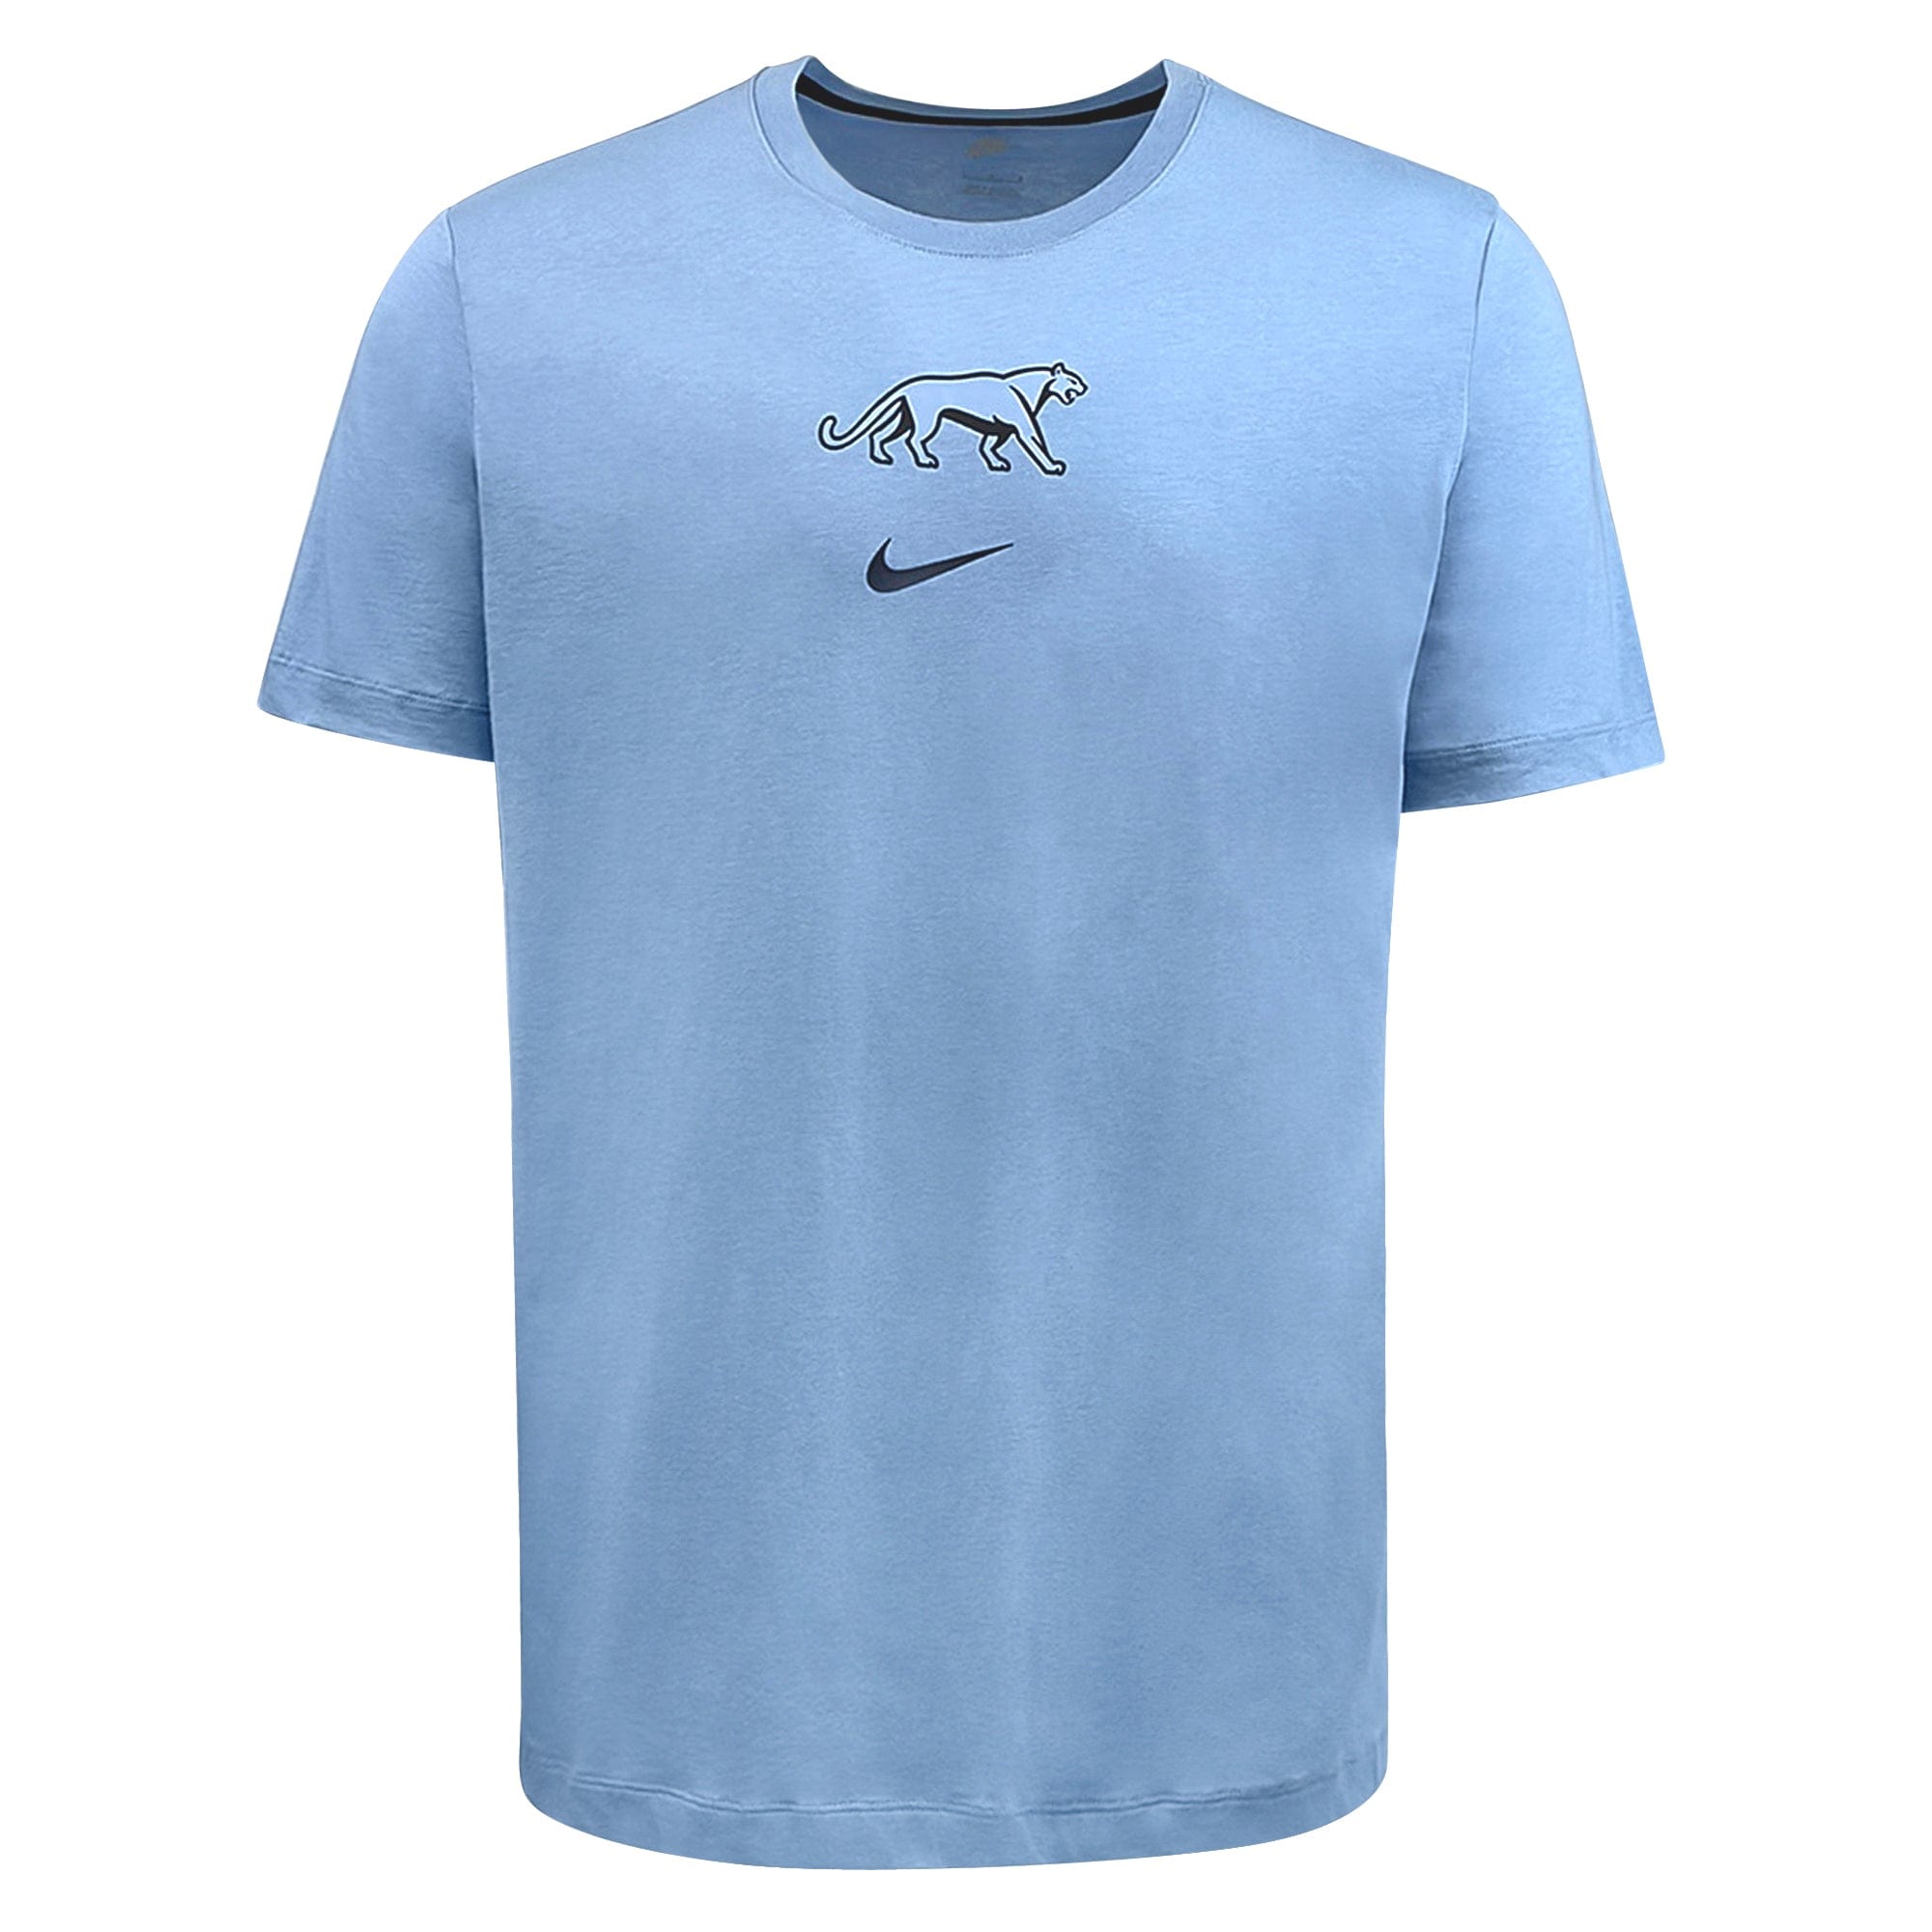 Pumas T-shirt 23/24 Nike | World Rugby by Cotton Tee Shop Argentina Rugby 